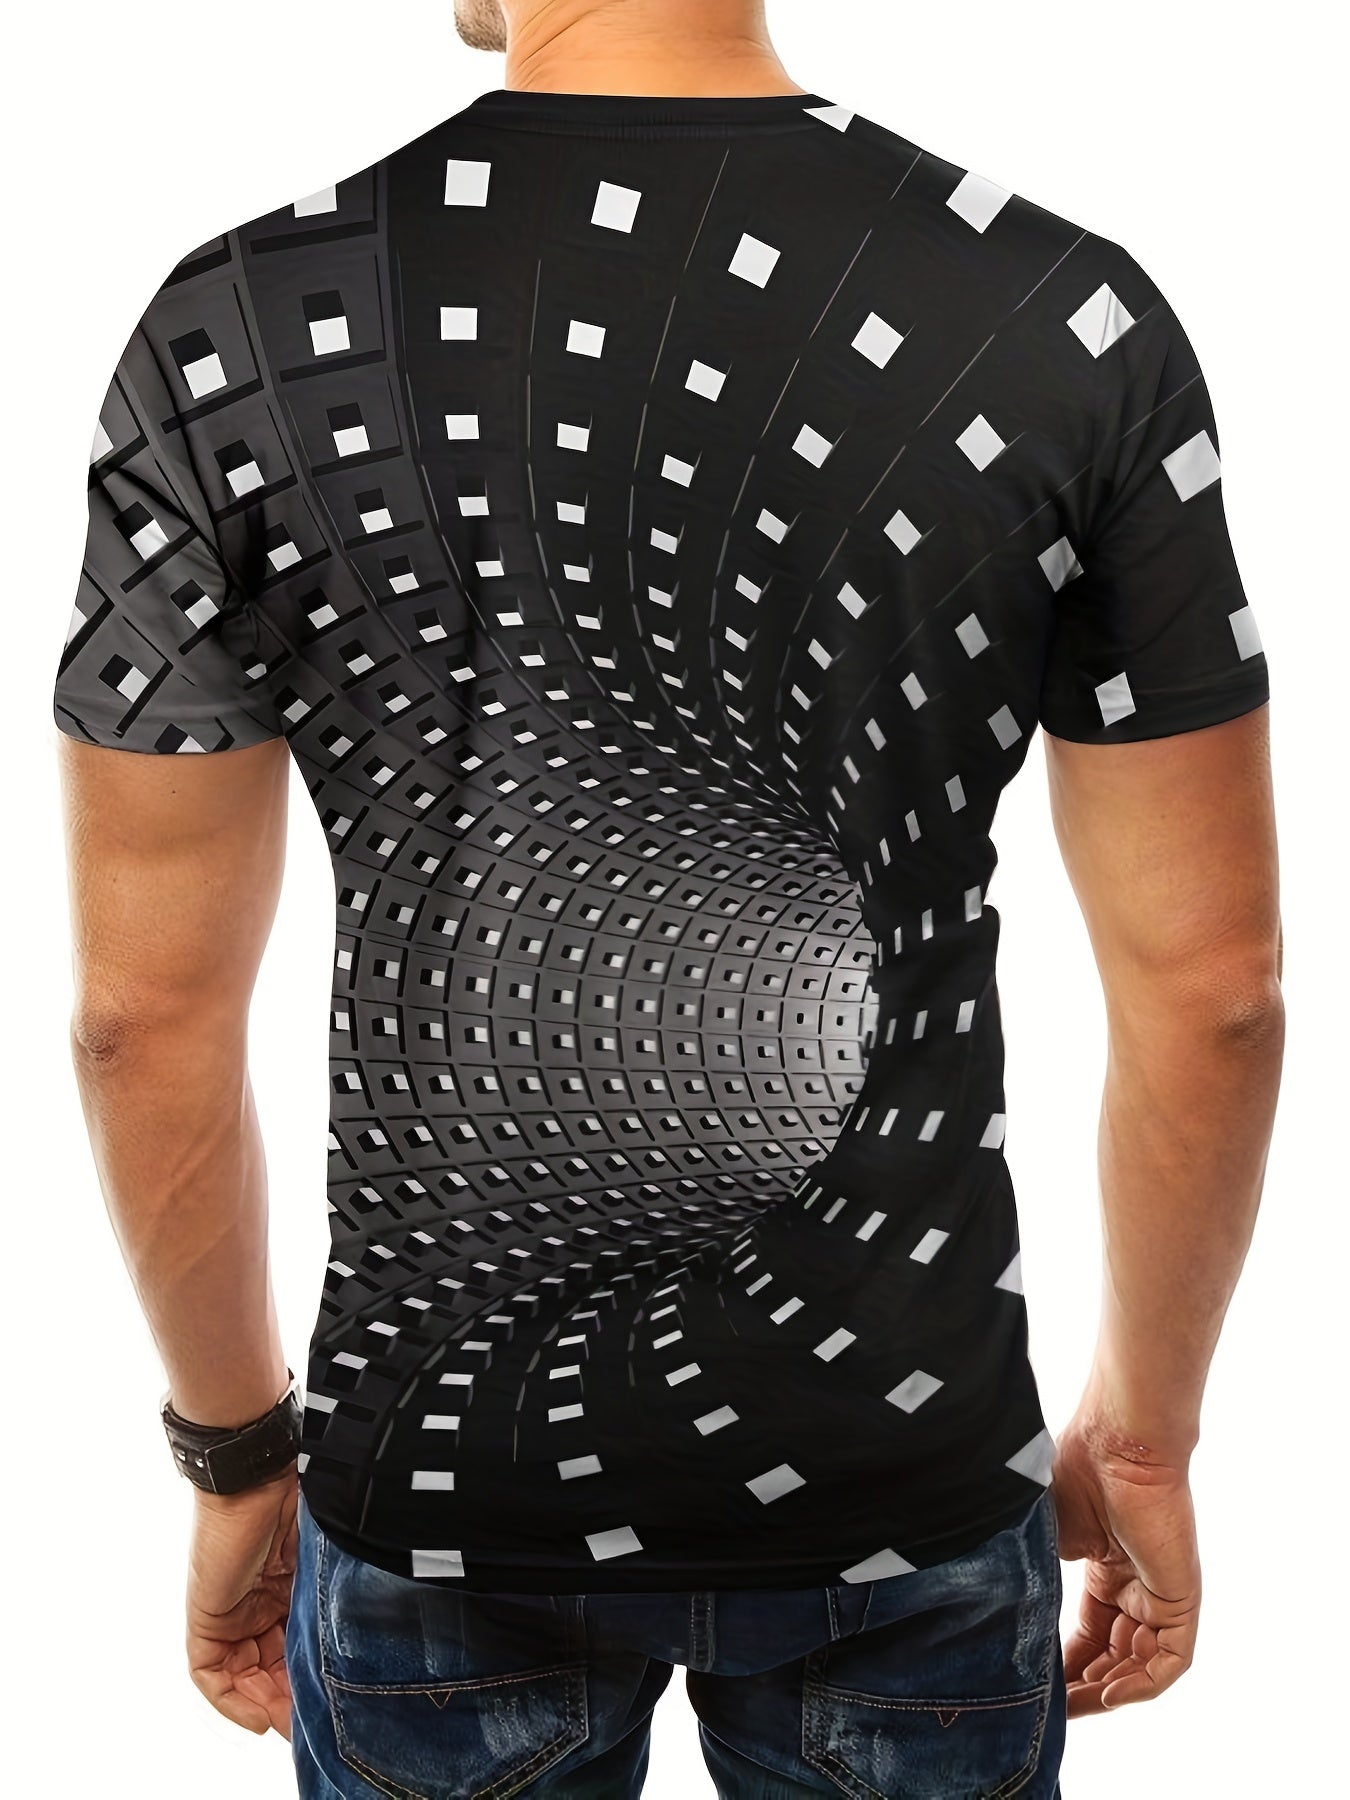 Men's Optical Illusion Black and White T-Shirt - Unique Design for Summer Style and Comfort